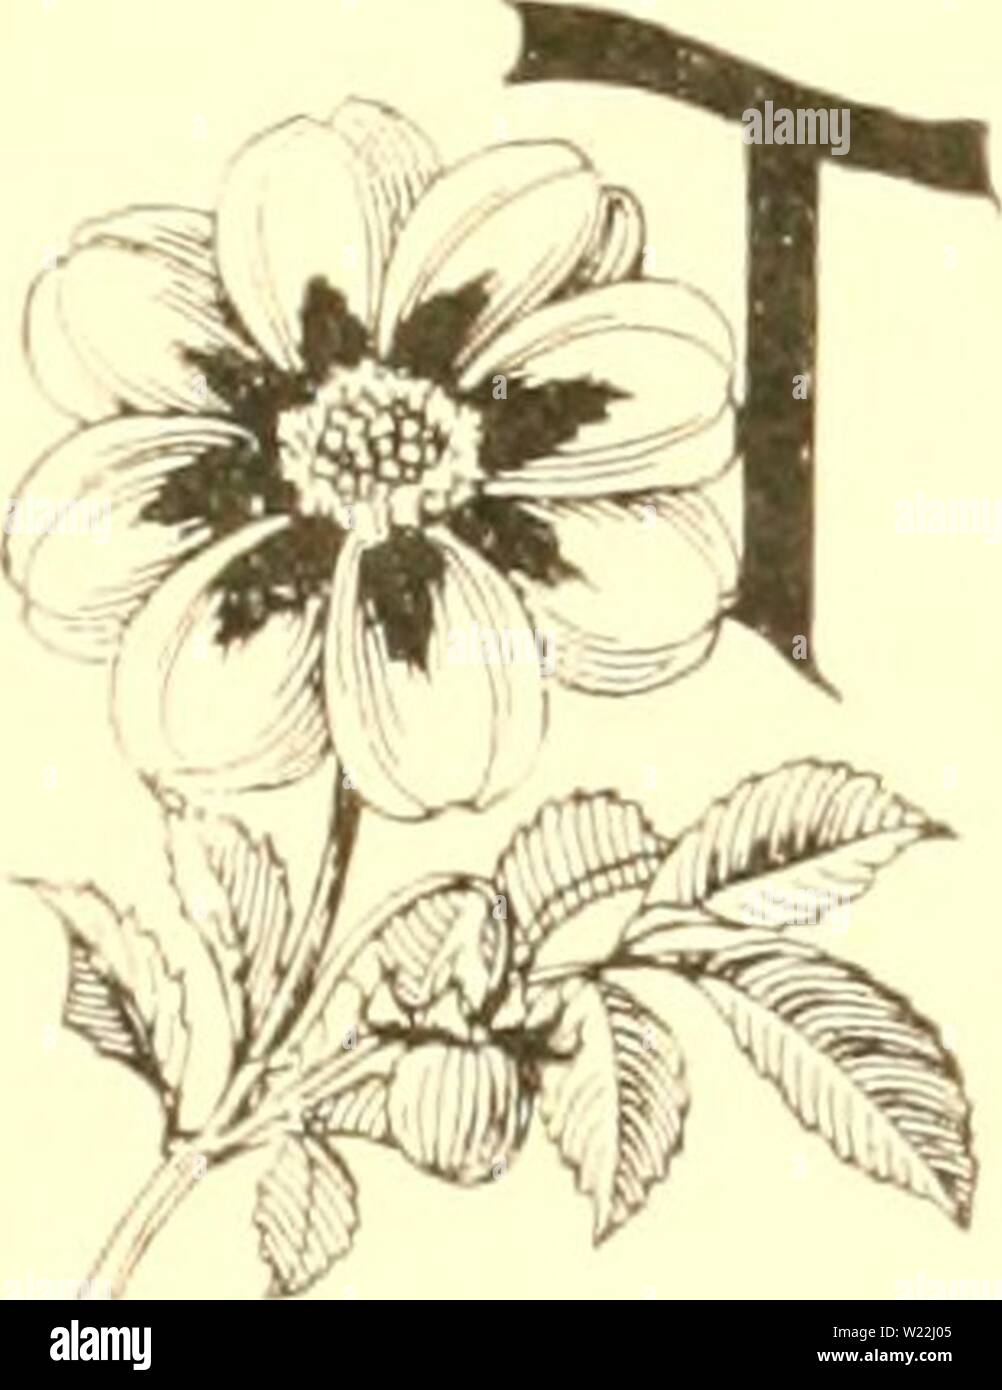 Archive image from page 18 of The Dahlia  a practical. The Dahlia : a practical treatise on its habits, characteristics, cultivation and history  dahliapracticalt00peac Year: 1896  THE DAHLIA. CHAPTER I. THE DAHLIA.    HE Dahlia ( Dahlia Variabilis of LiniKeus) is a tender tuberous rooted perennial ; a native of Mexico, and was first discovered by Baron Humboldt in 17S9. It was sent ly him to Prof. Cavenilles, of the Botanical Gardens, Madrid, who named it Dahlia, in honor of the celebrated Swedish botanist, Prof. Andrew Dahl. It was introduced into England in the same 3-ear (17S9) by the Marc Stock Photo